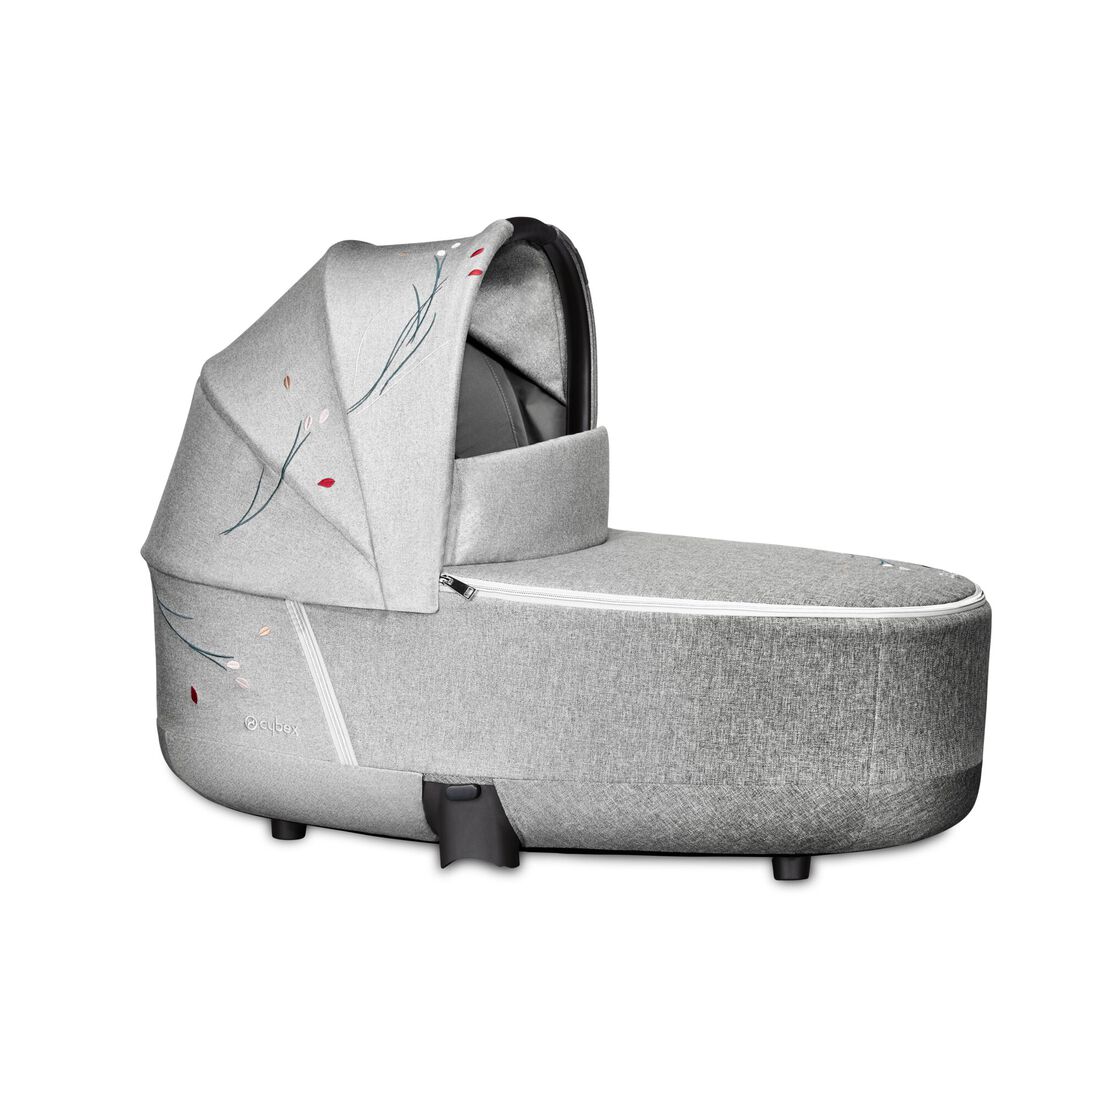 CYBEX Priam 3 Lux Carry Cot - Koi in Koi large image number 1